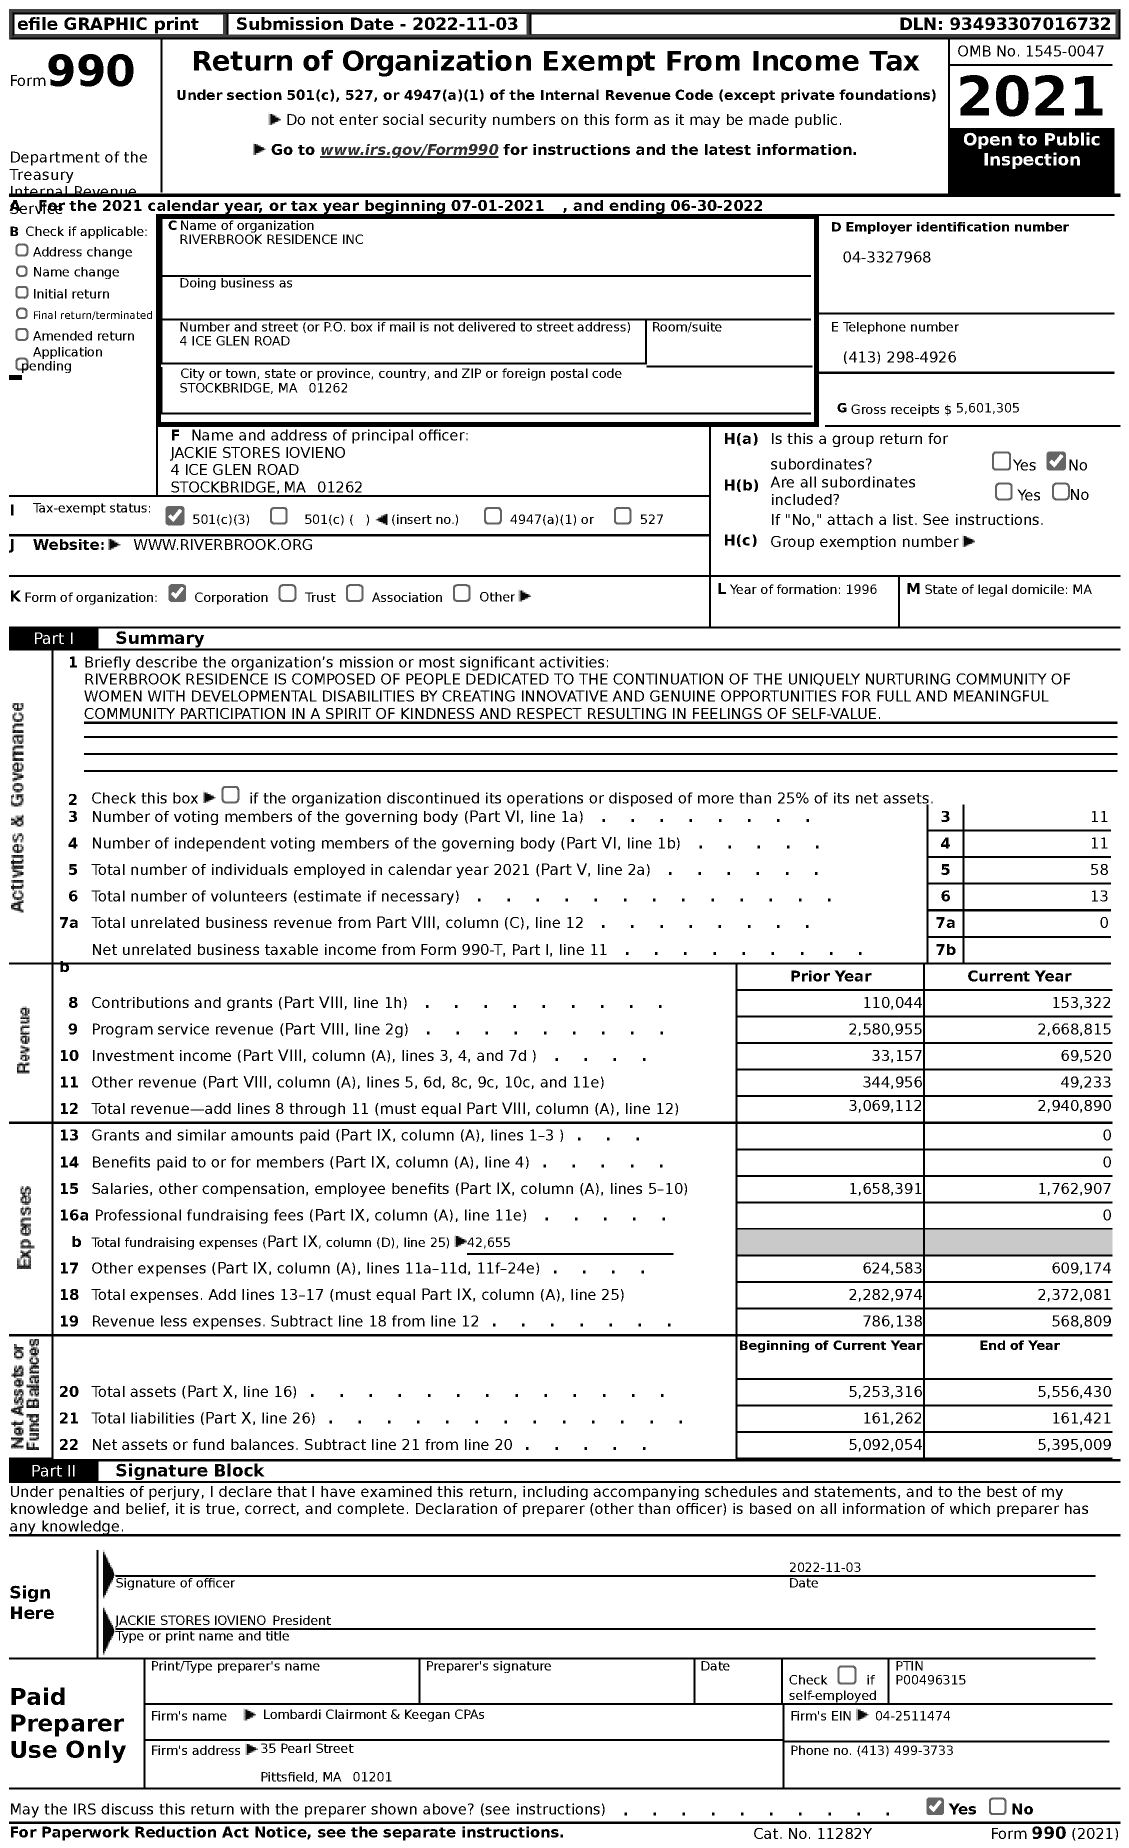 Image of first page of 2021 Form 990 for Riverbrook Residence